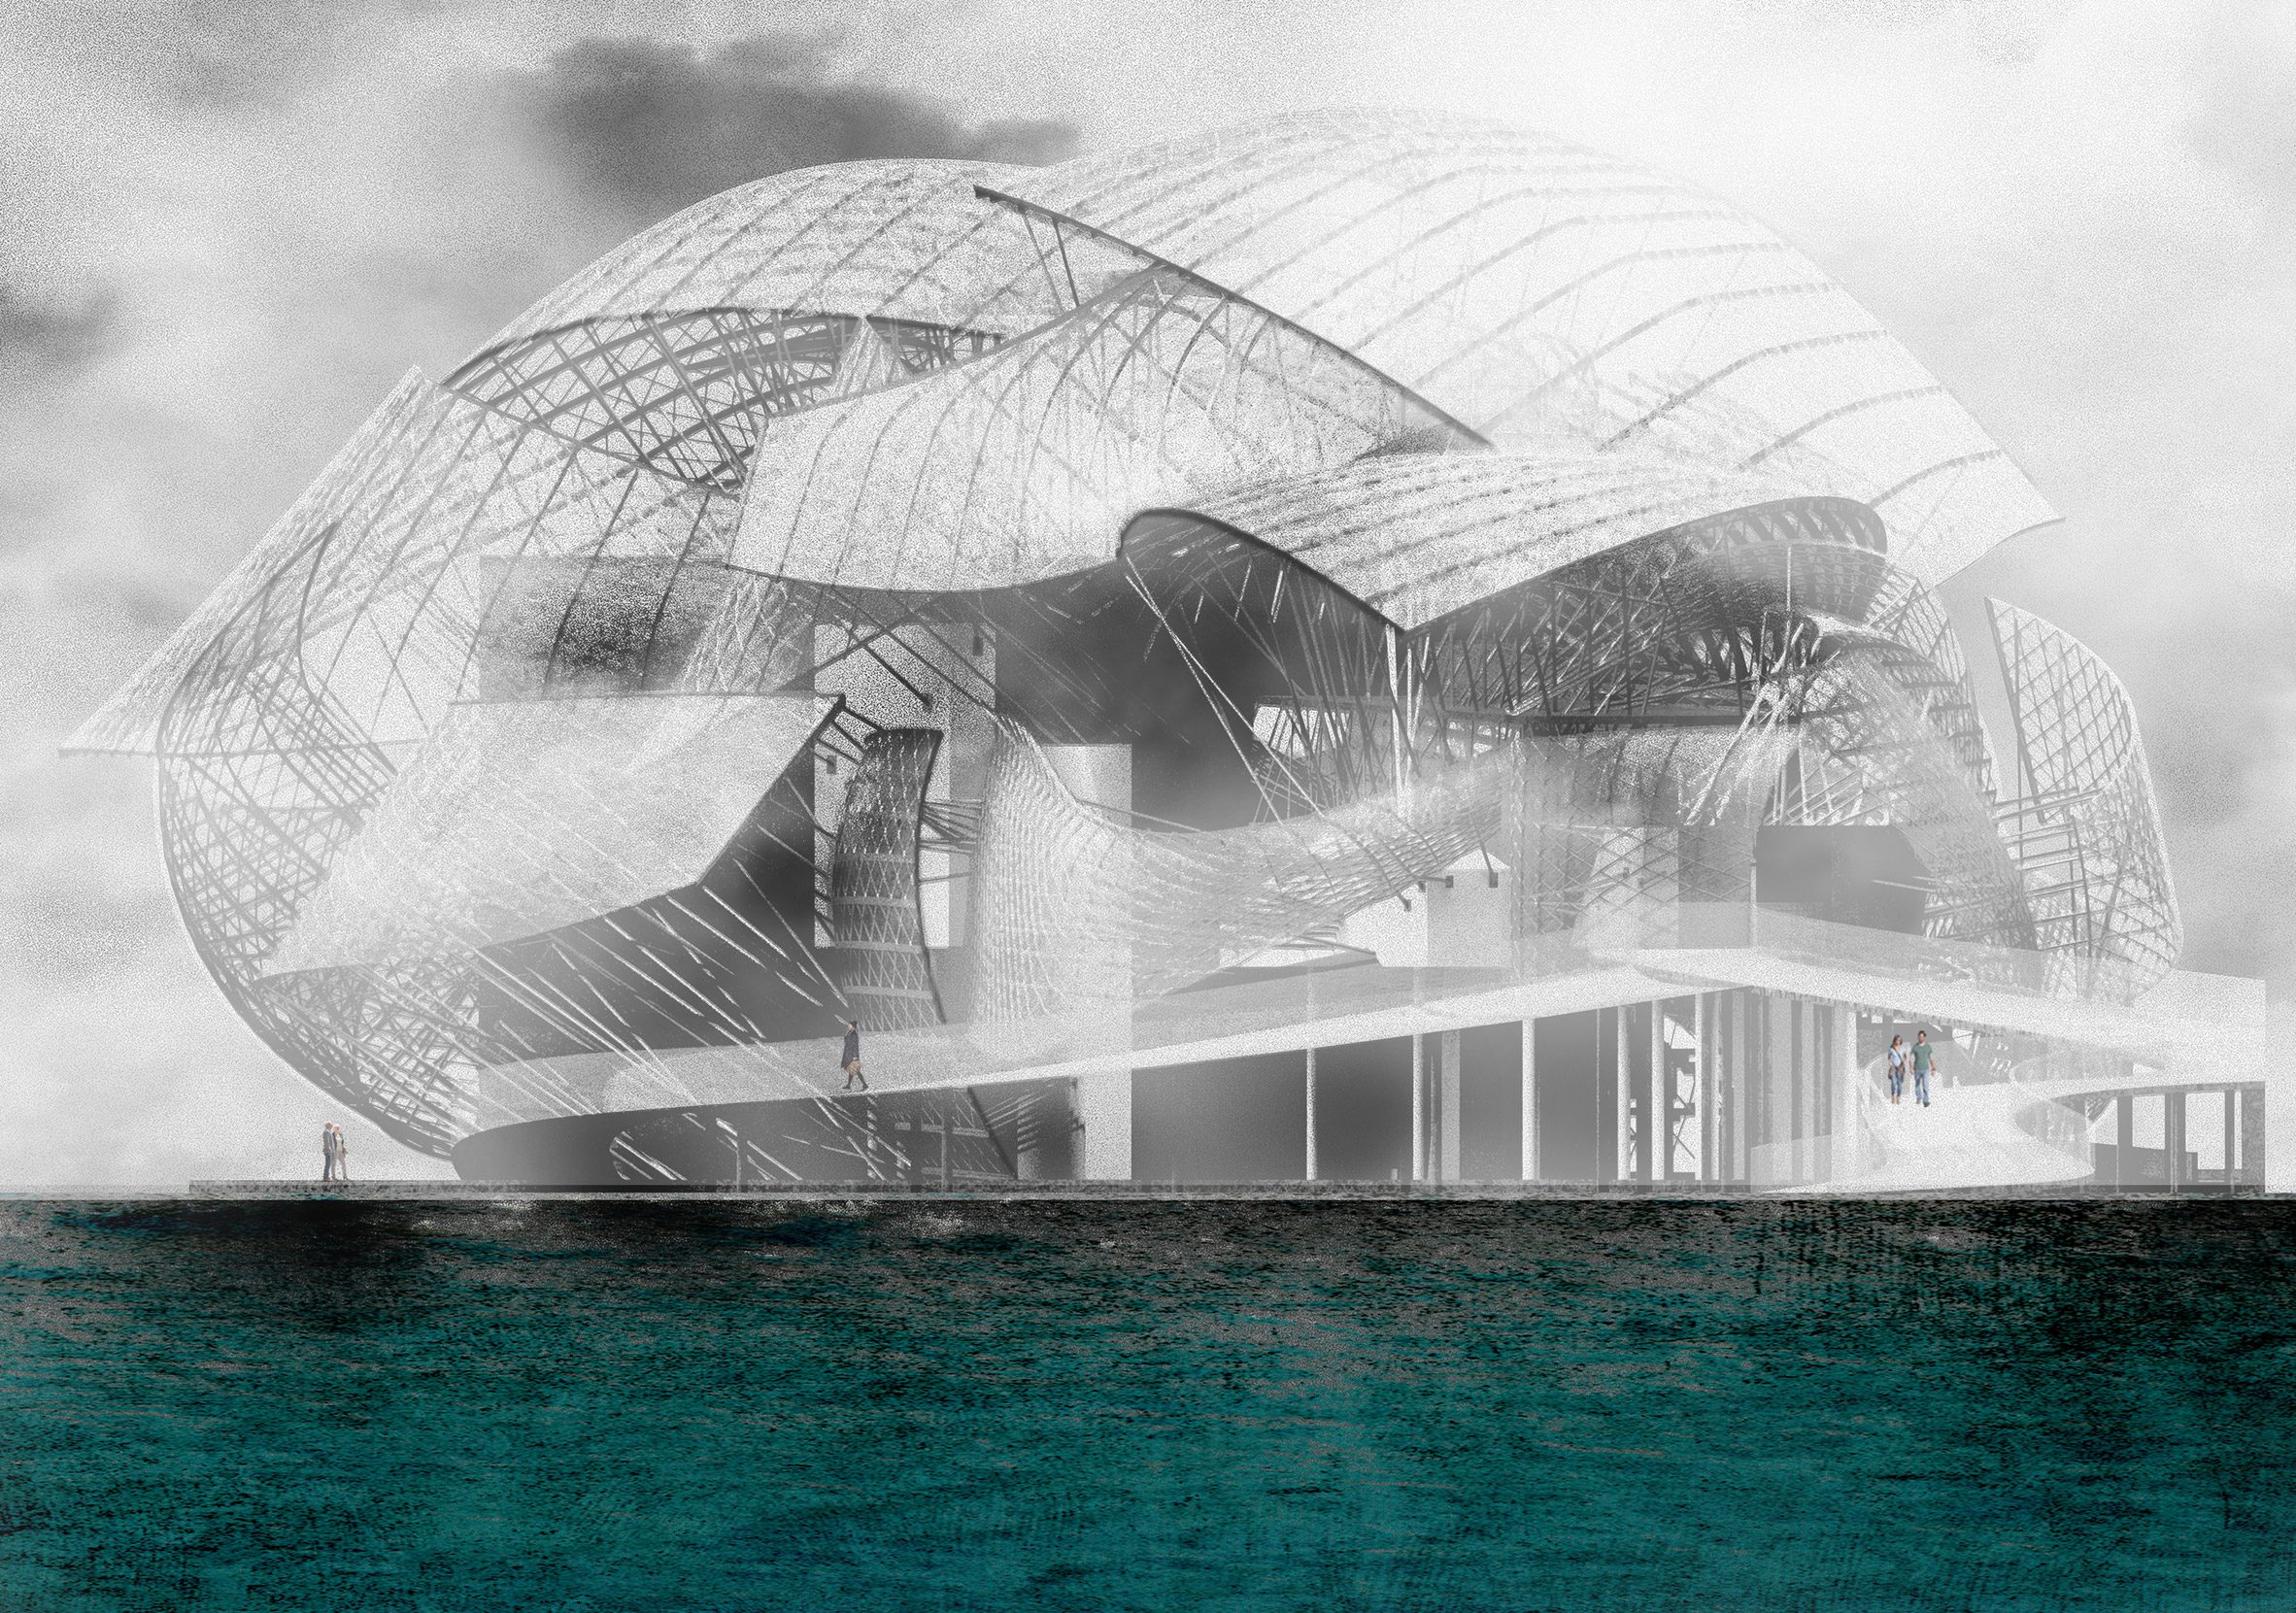 Visualisation showing large faceted structure beside body of water